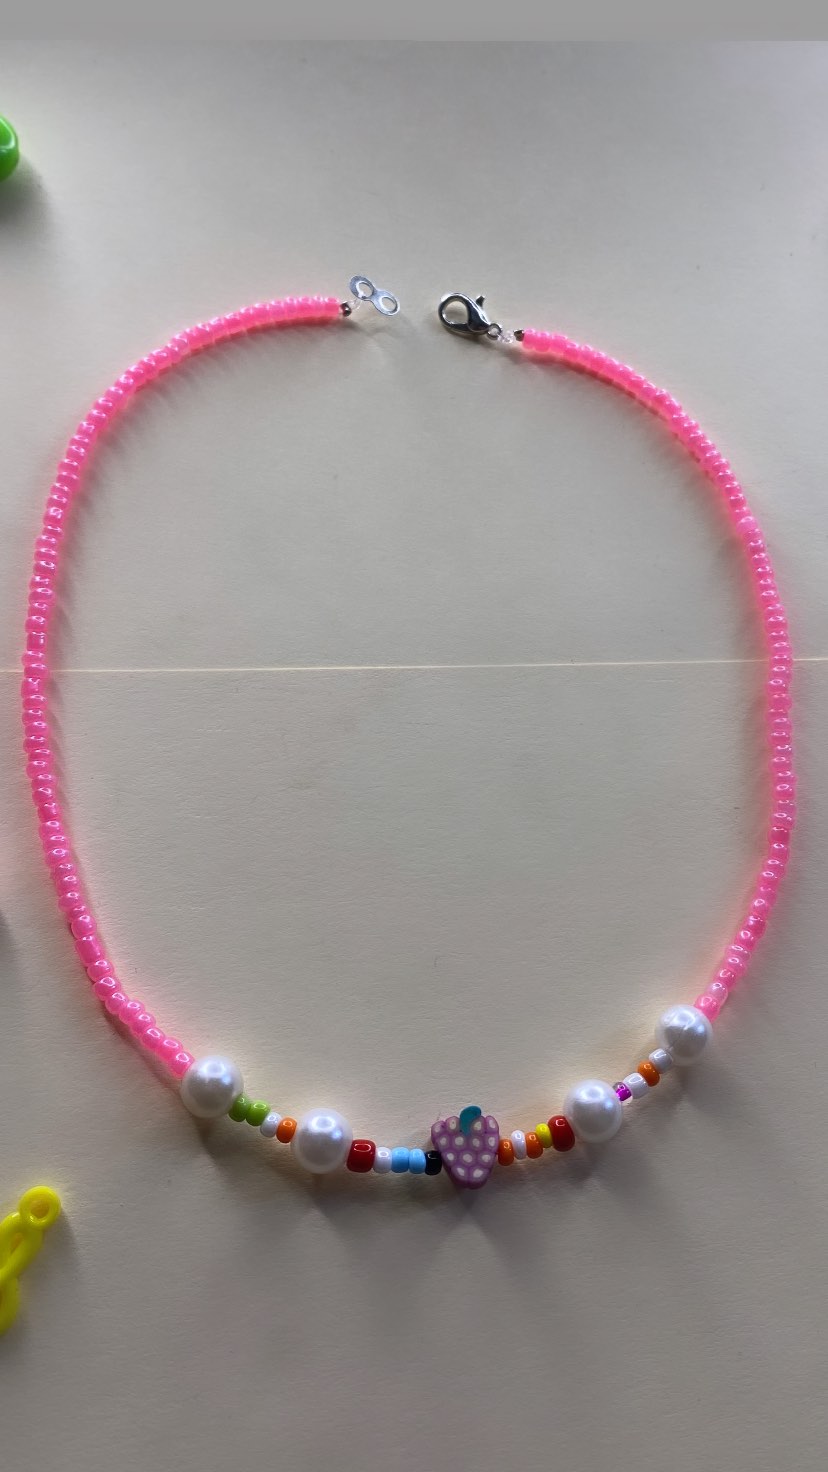 Colorful beaded necklace with a central purple grape-shaped bead and various other beads in pink, white, red, and yellow.